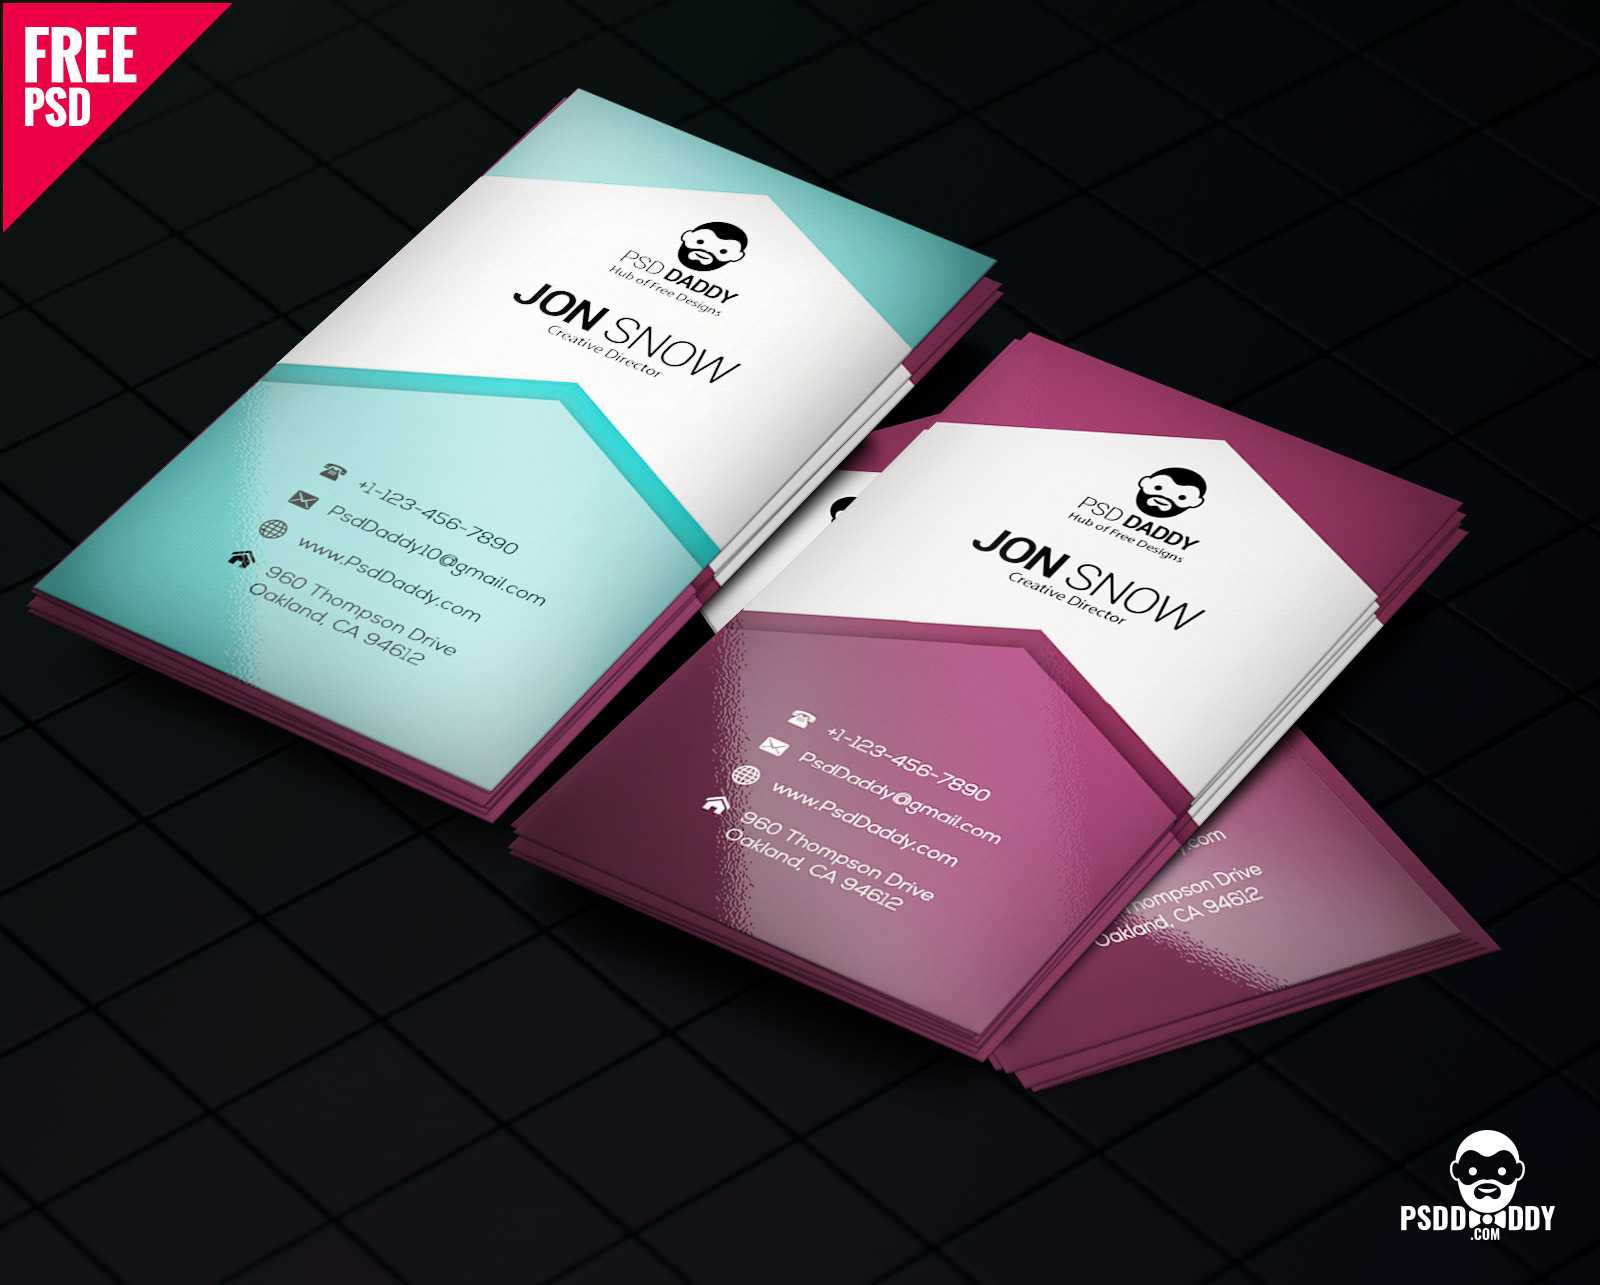 Download]Creative Business Card Psd Free | Psddaddy With Business Card Size Photoshop Template